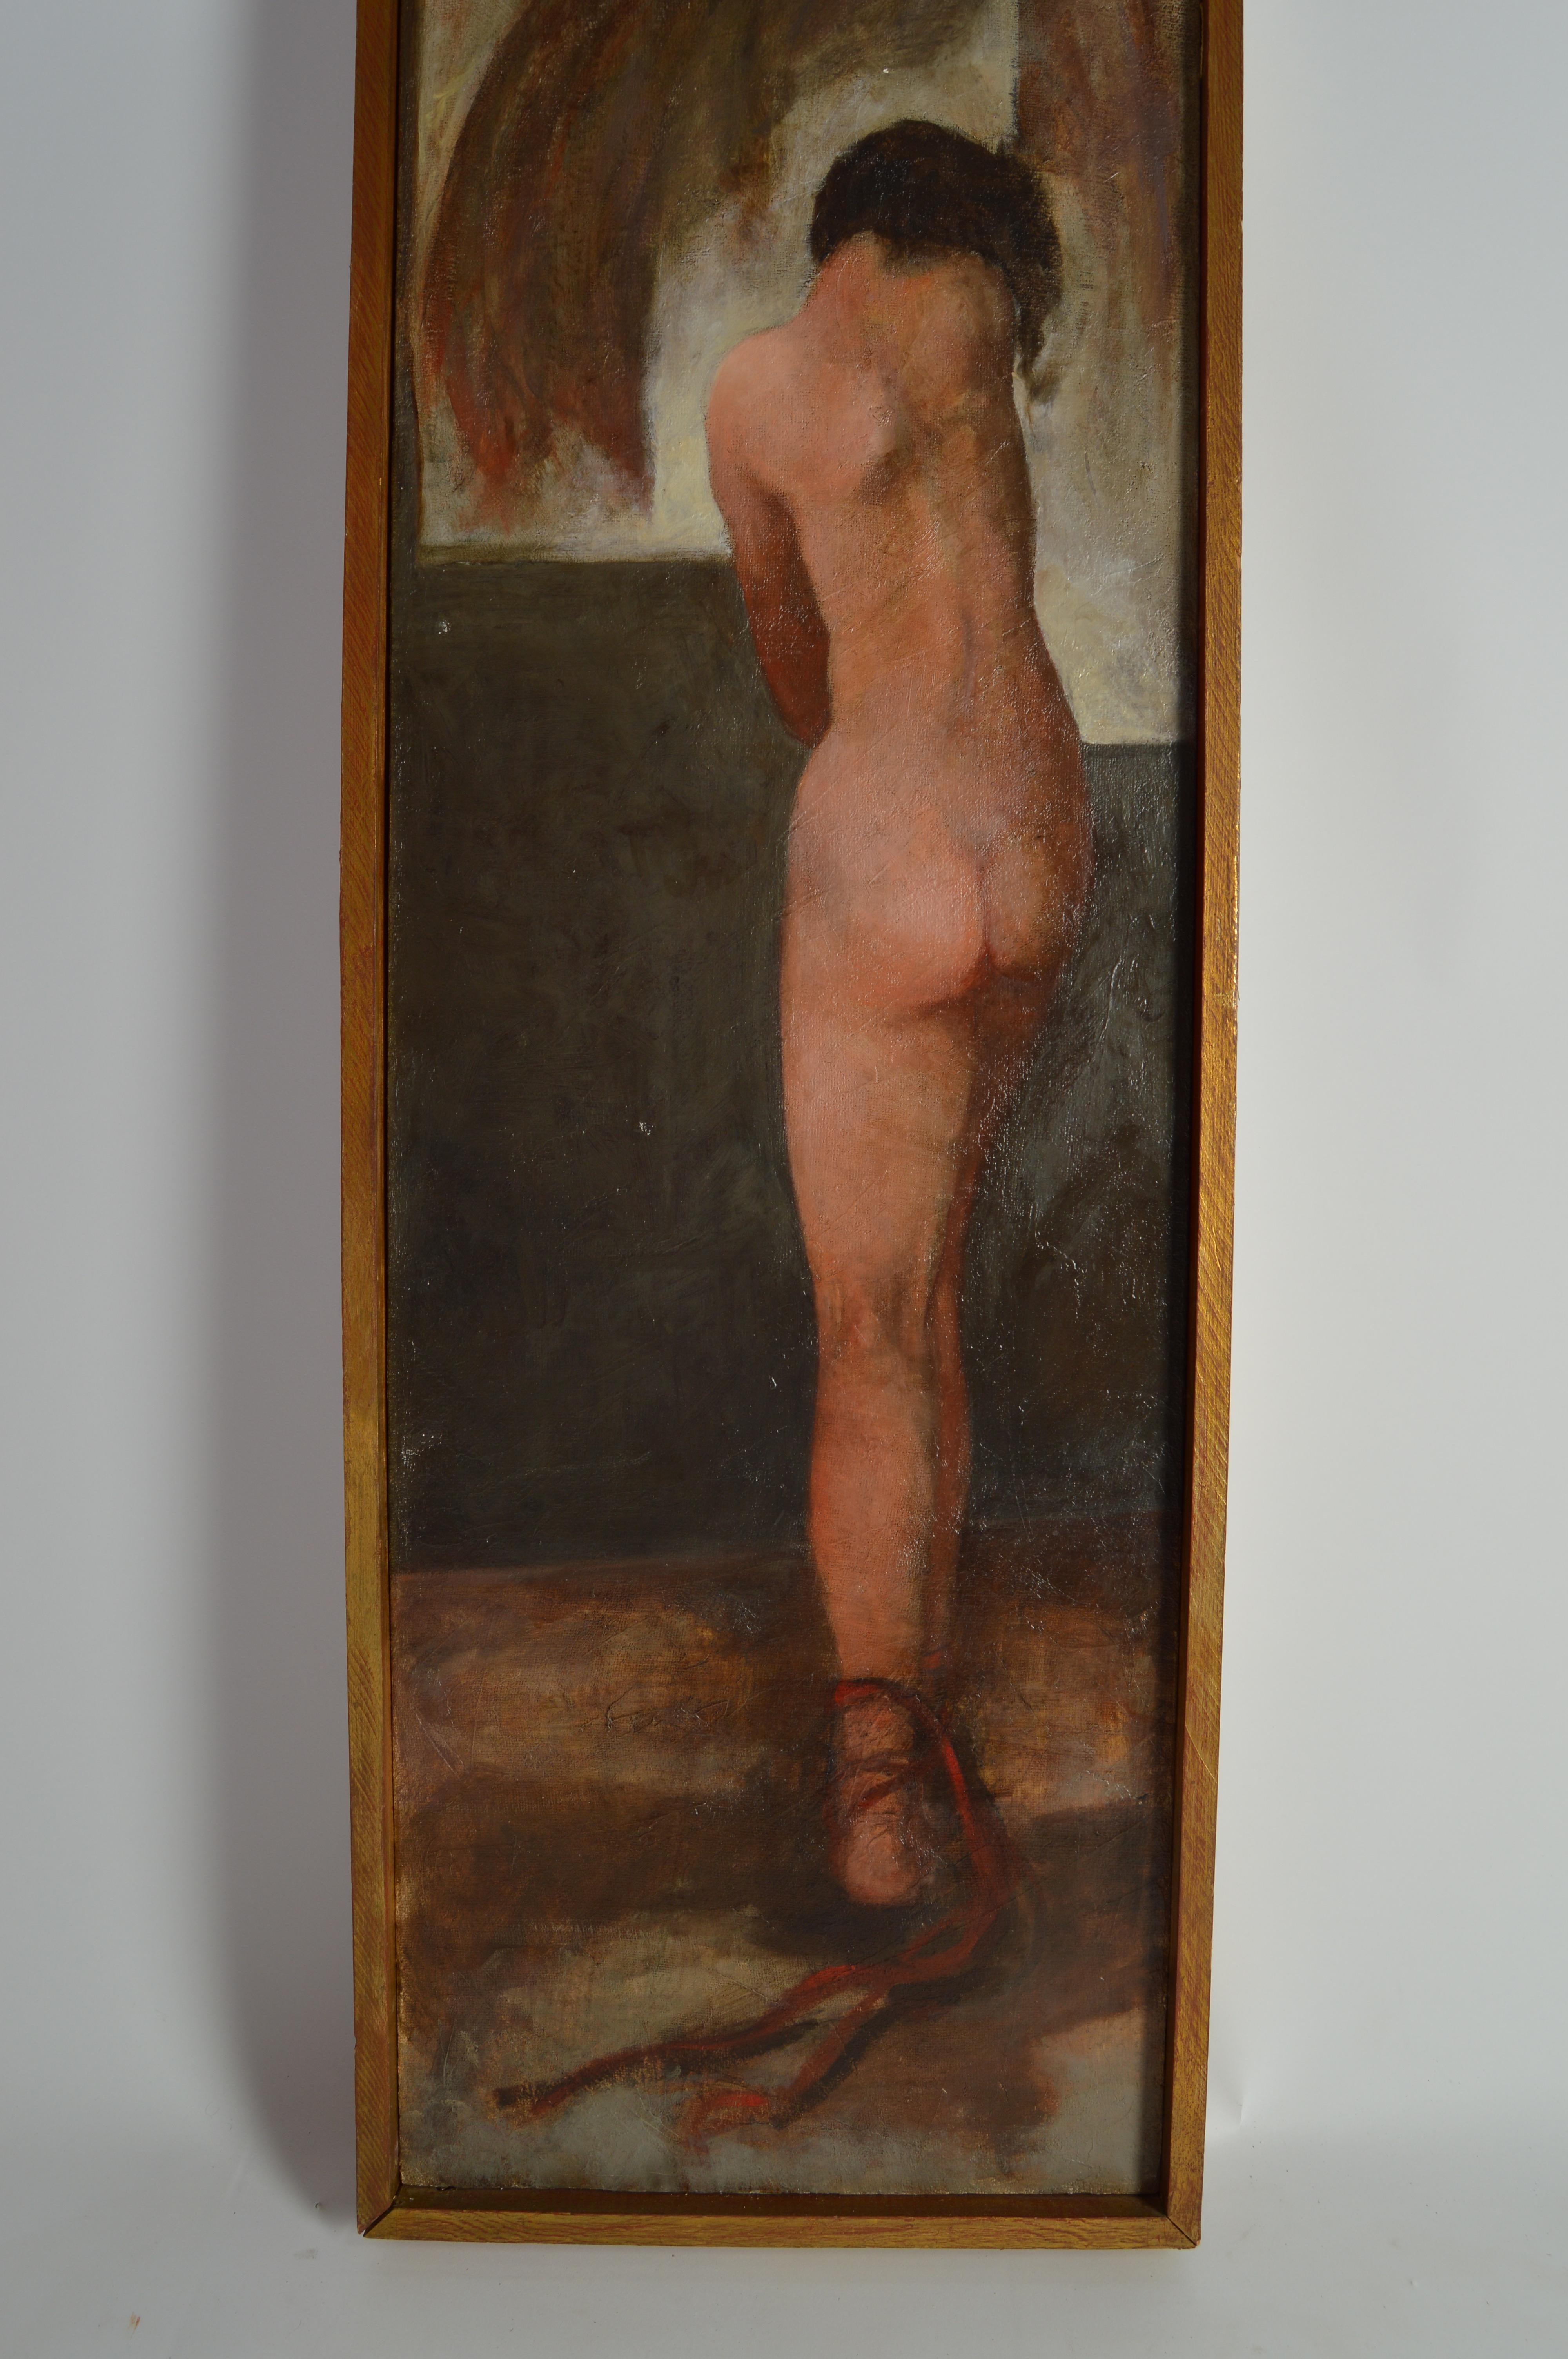 Expressionist Art Deco Nude Oil Painting on Burlap circa 1930 in the Manner of Edvard Munch